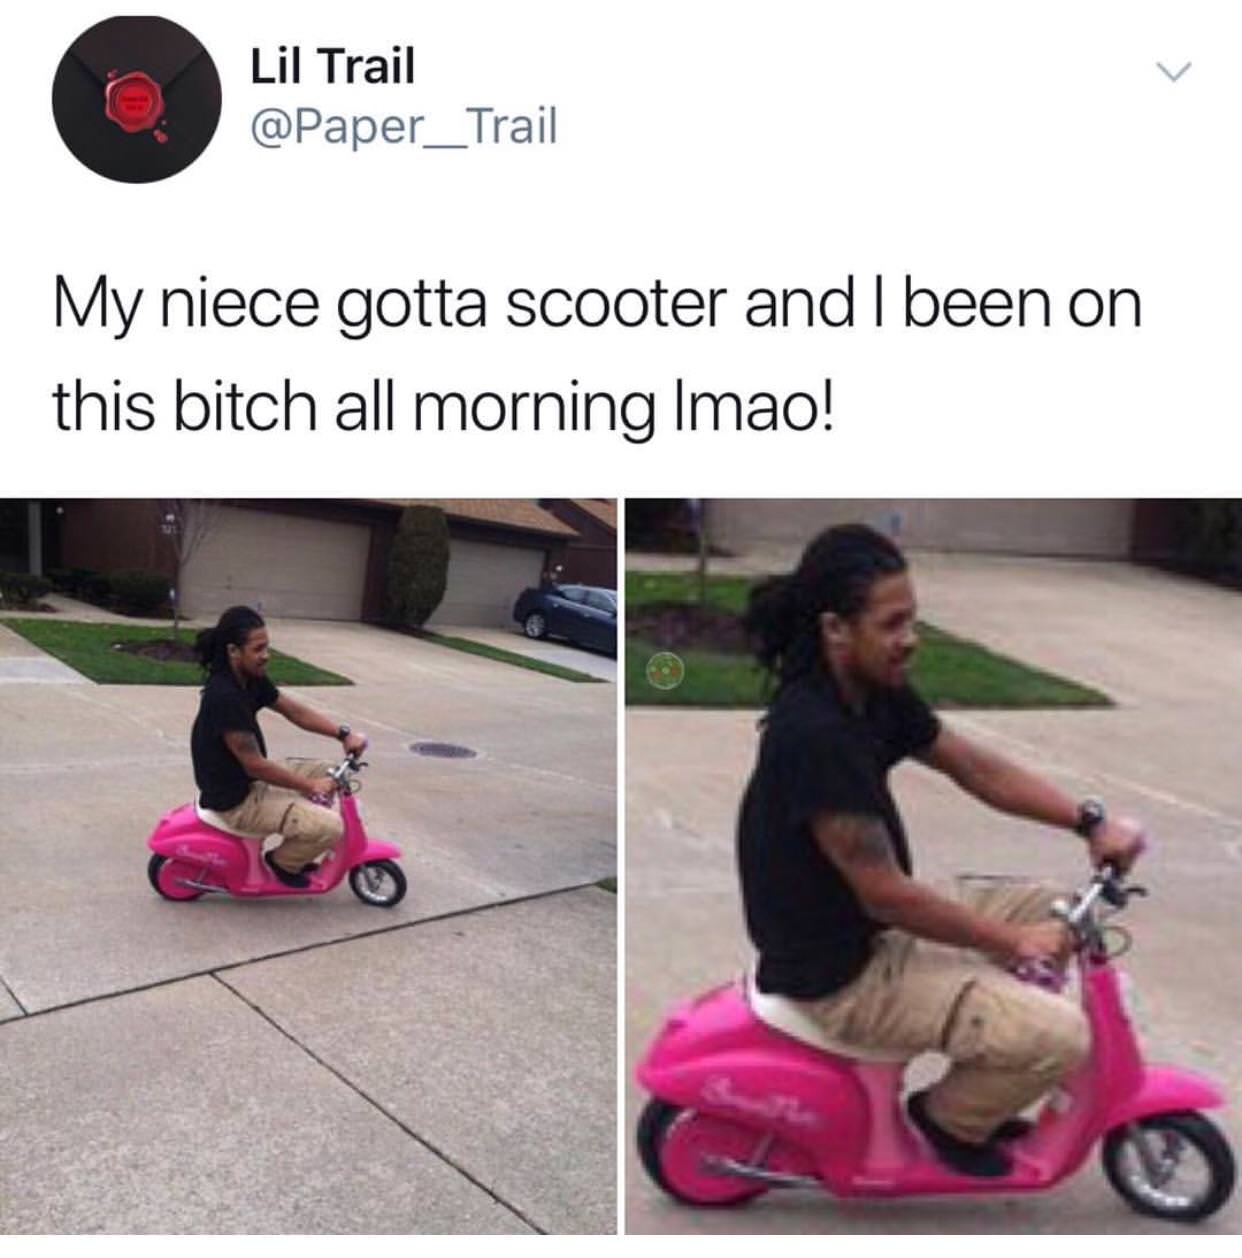 earl sweatshirt wholesome - Lil Trail My niece gotta scooter and I been on this bitch all morning Imao!